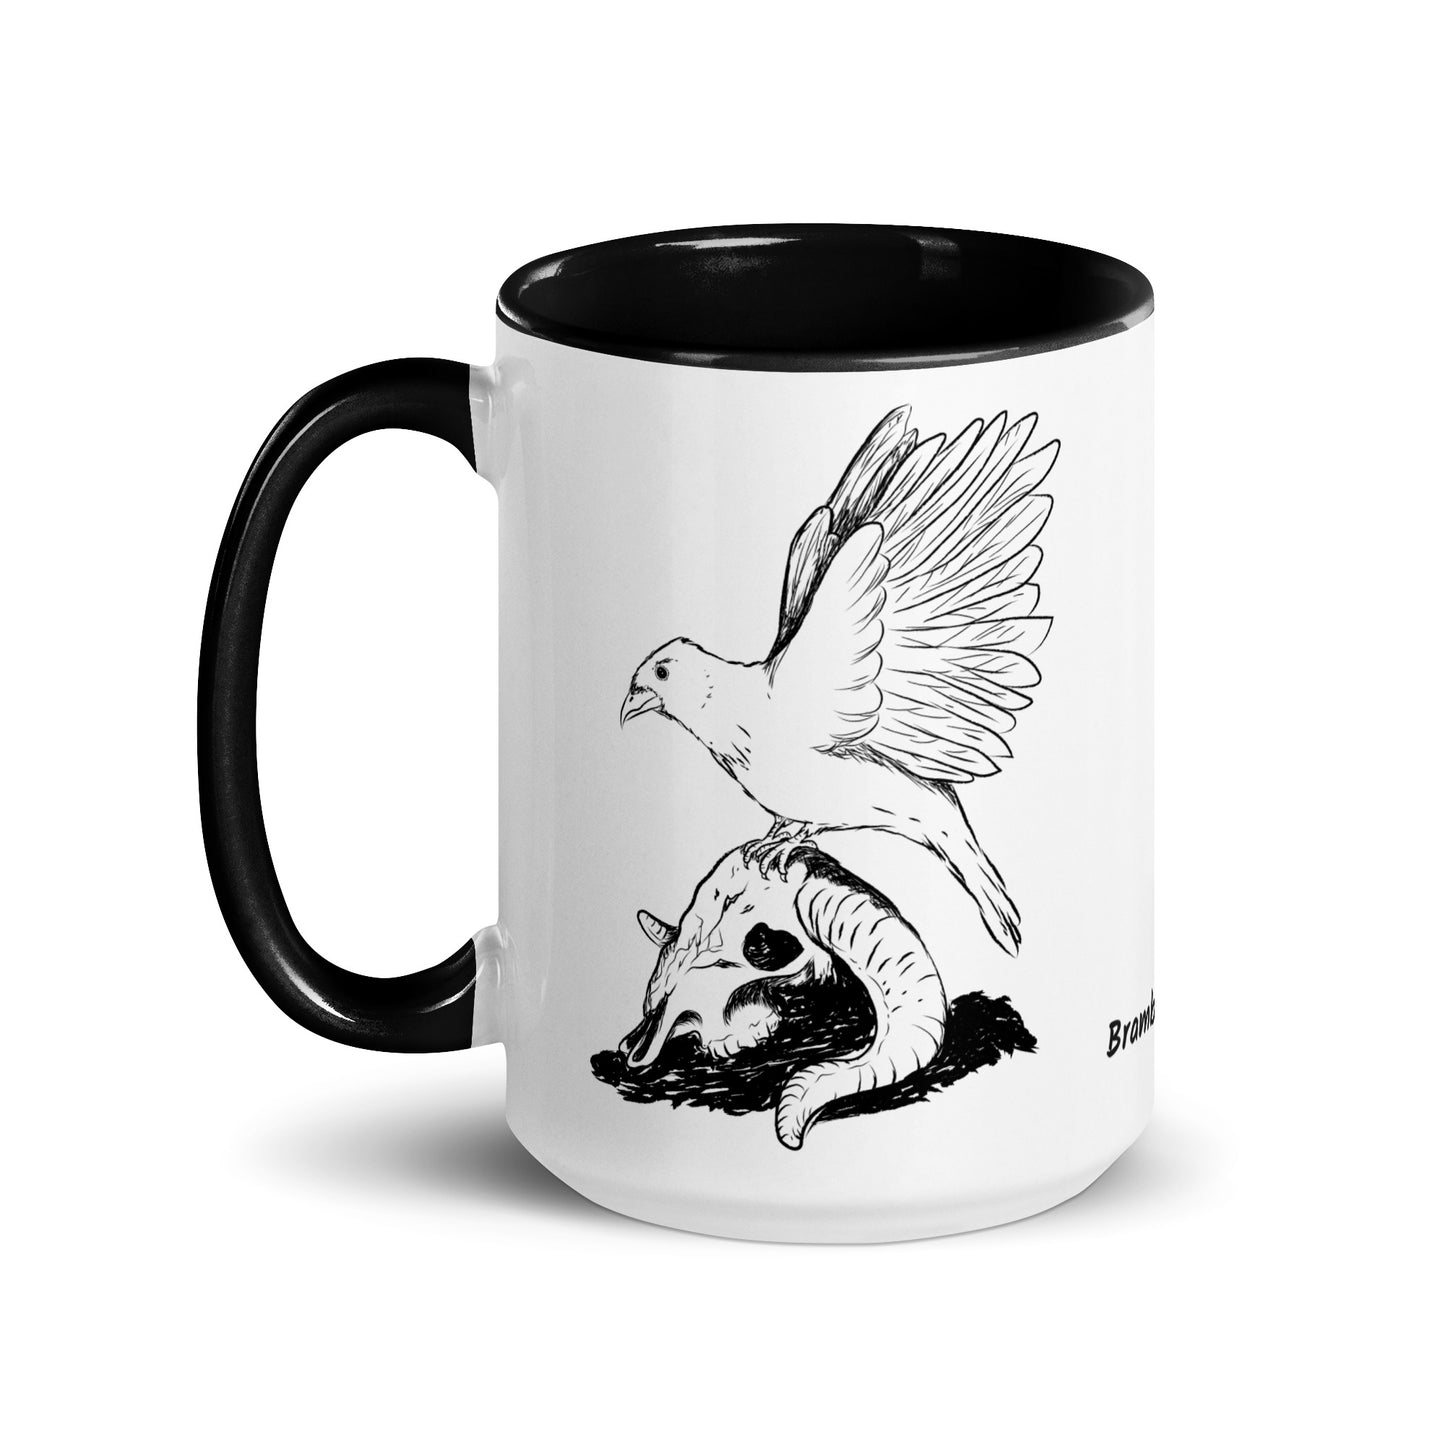 15 ounce white ceramic mug with black handle and inside. Features a double sided print of Reflections, a design with a crow sitting on a sheep skull. Dishwasher and microwave safe.